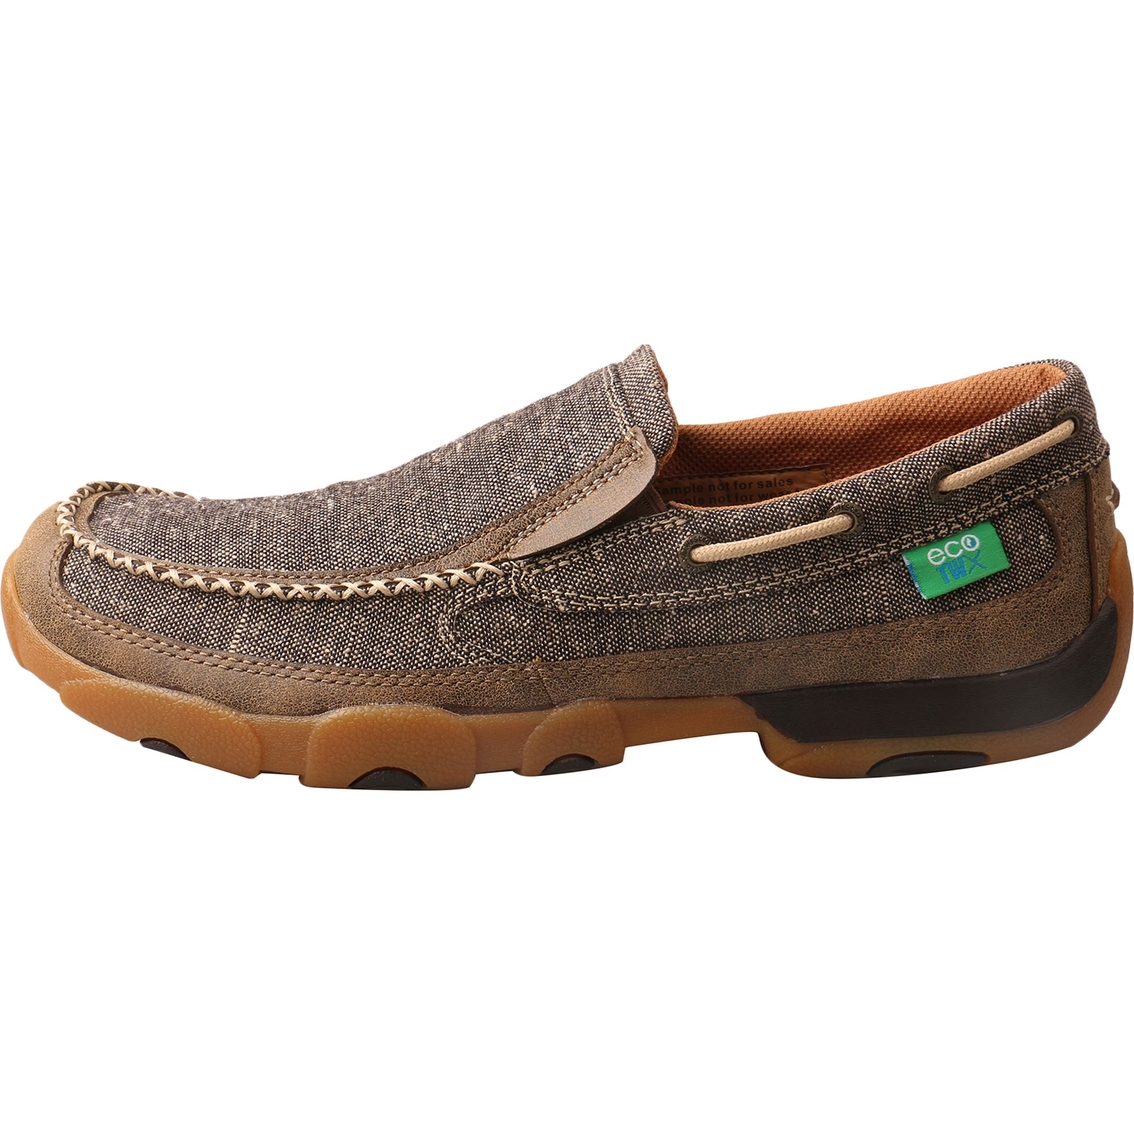 Twisted X Men's Slip-On Driving Moc Dust Shoes - Image 3 of 7